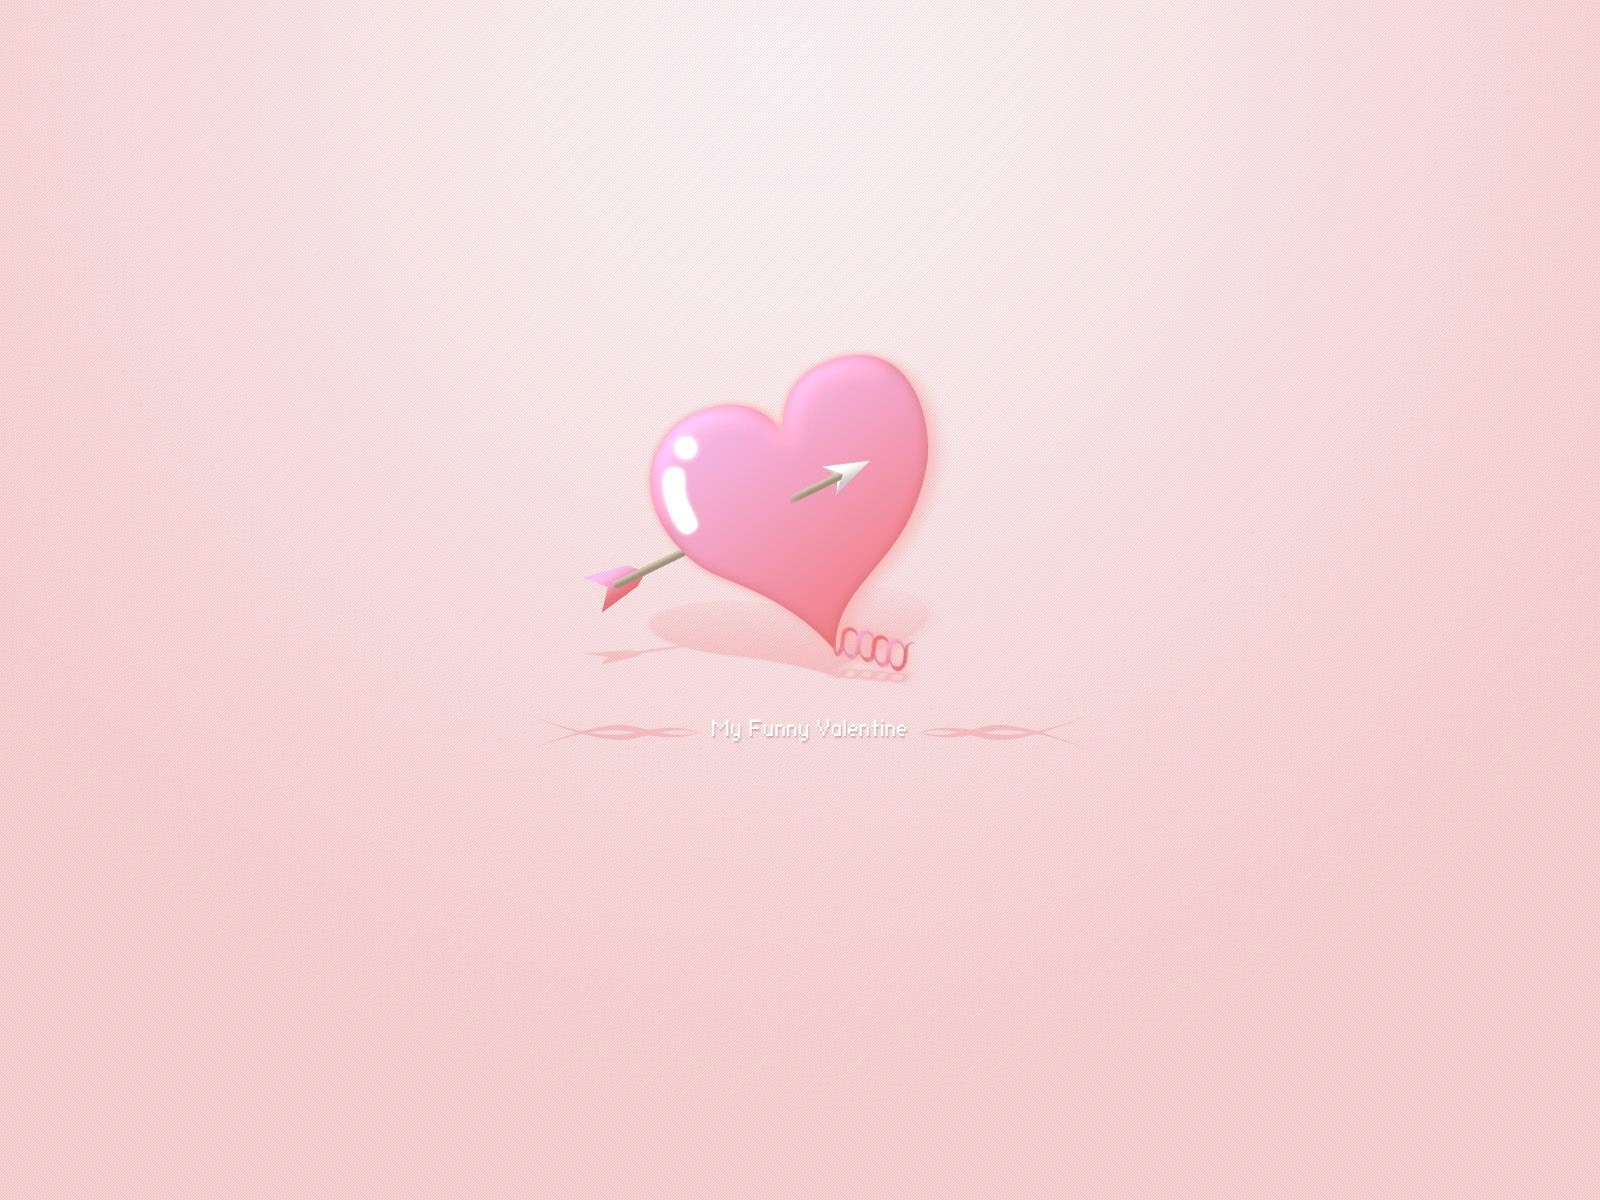 Valentine's Day Theme Wallpapers (3) #9 - 1600x1200